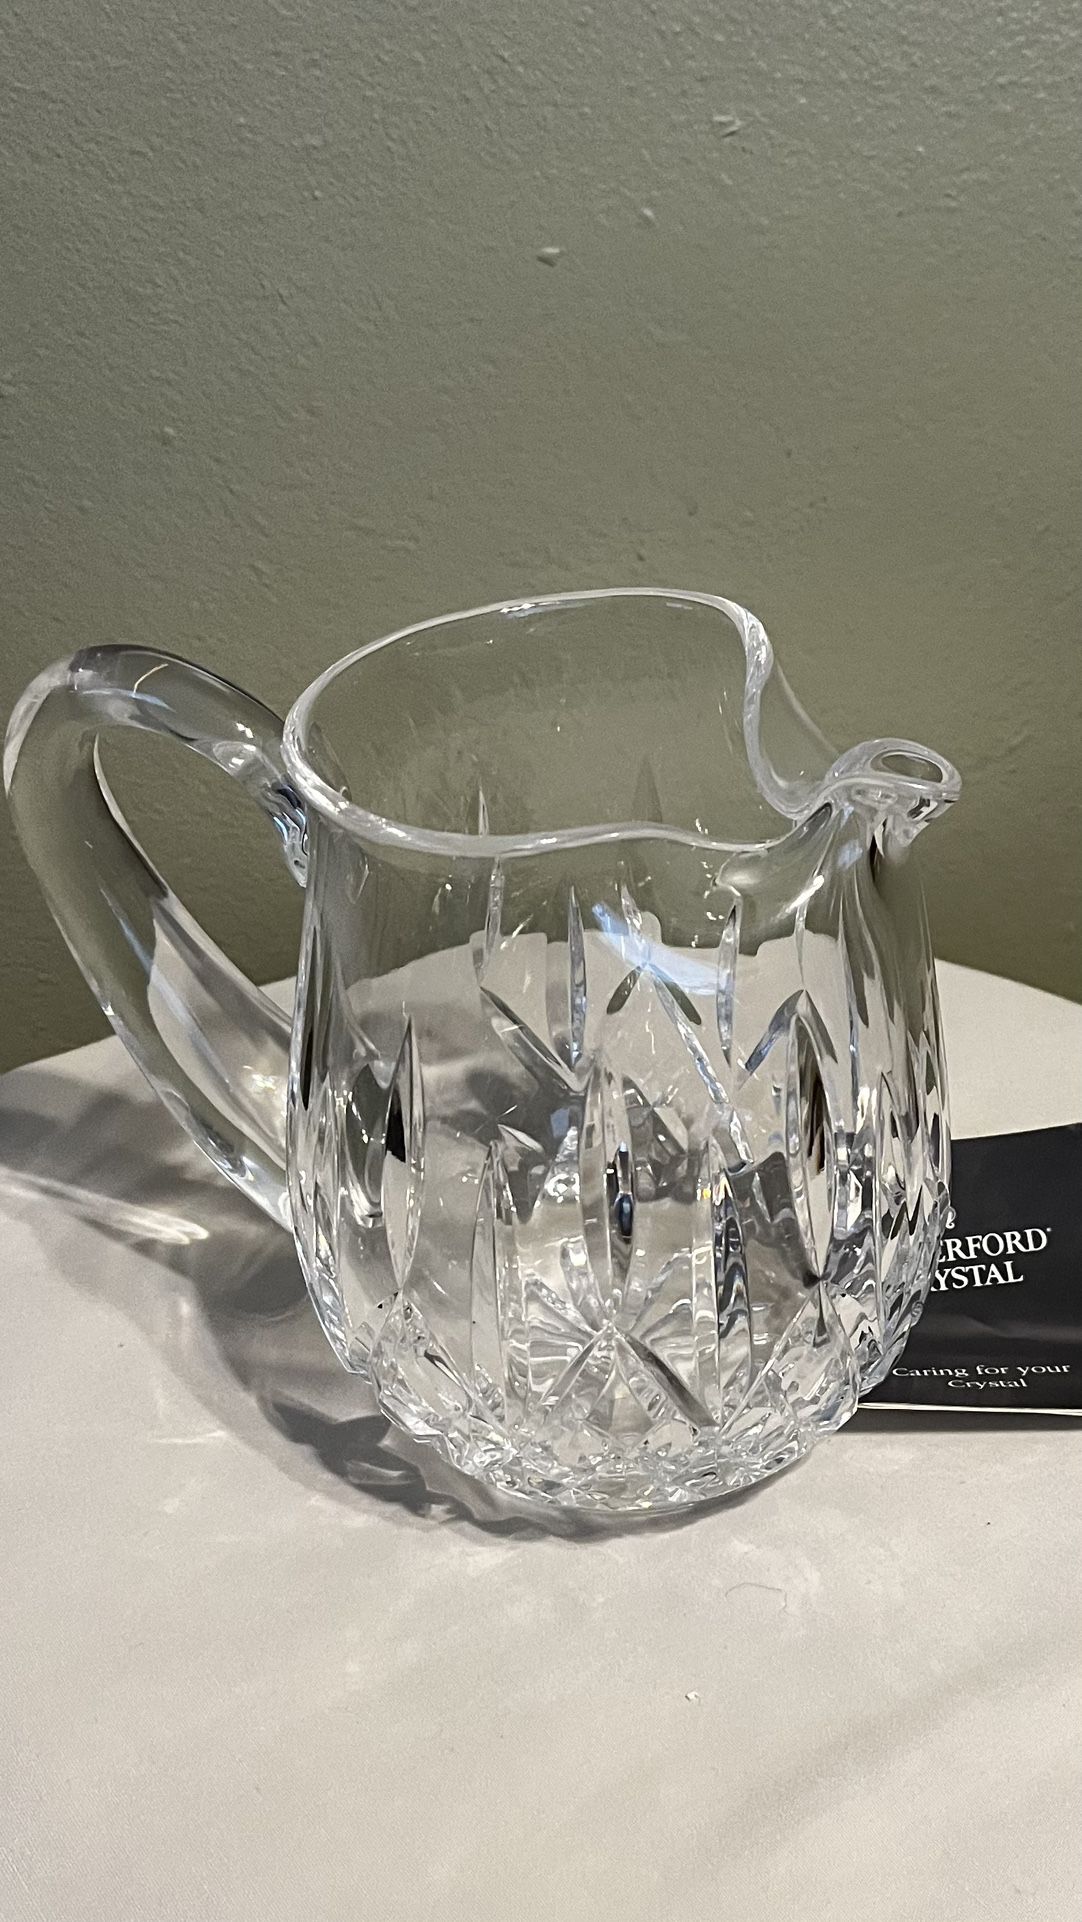 WATERFORD LISMORE CRYSTAL WEDGE & DIAMOND CUT ICE LIP PITCHER APROX. 6 “ TALL